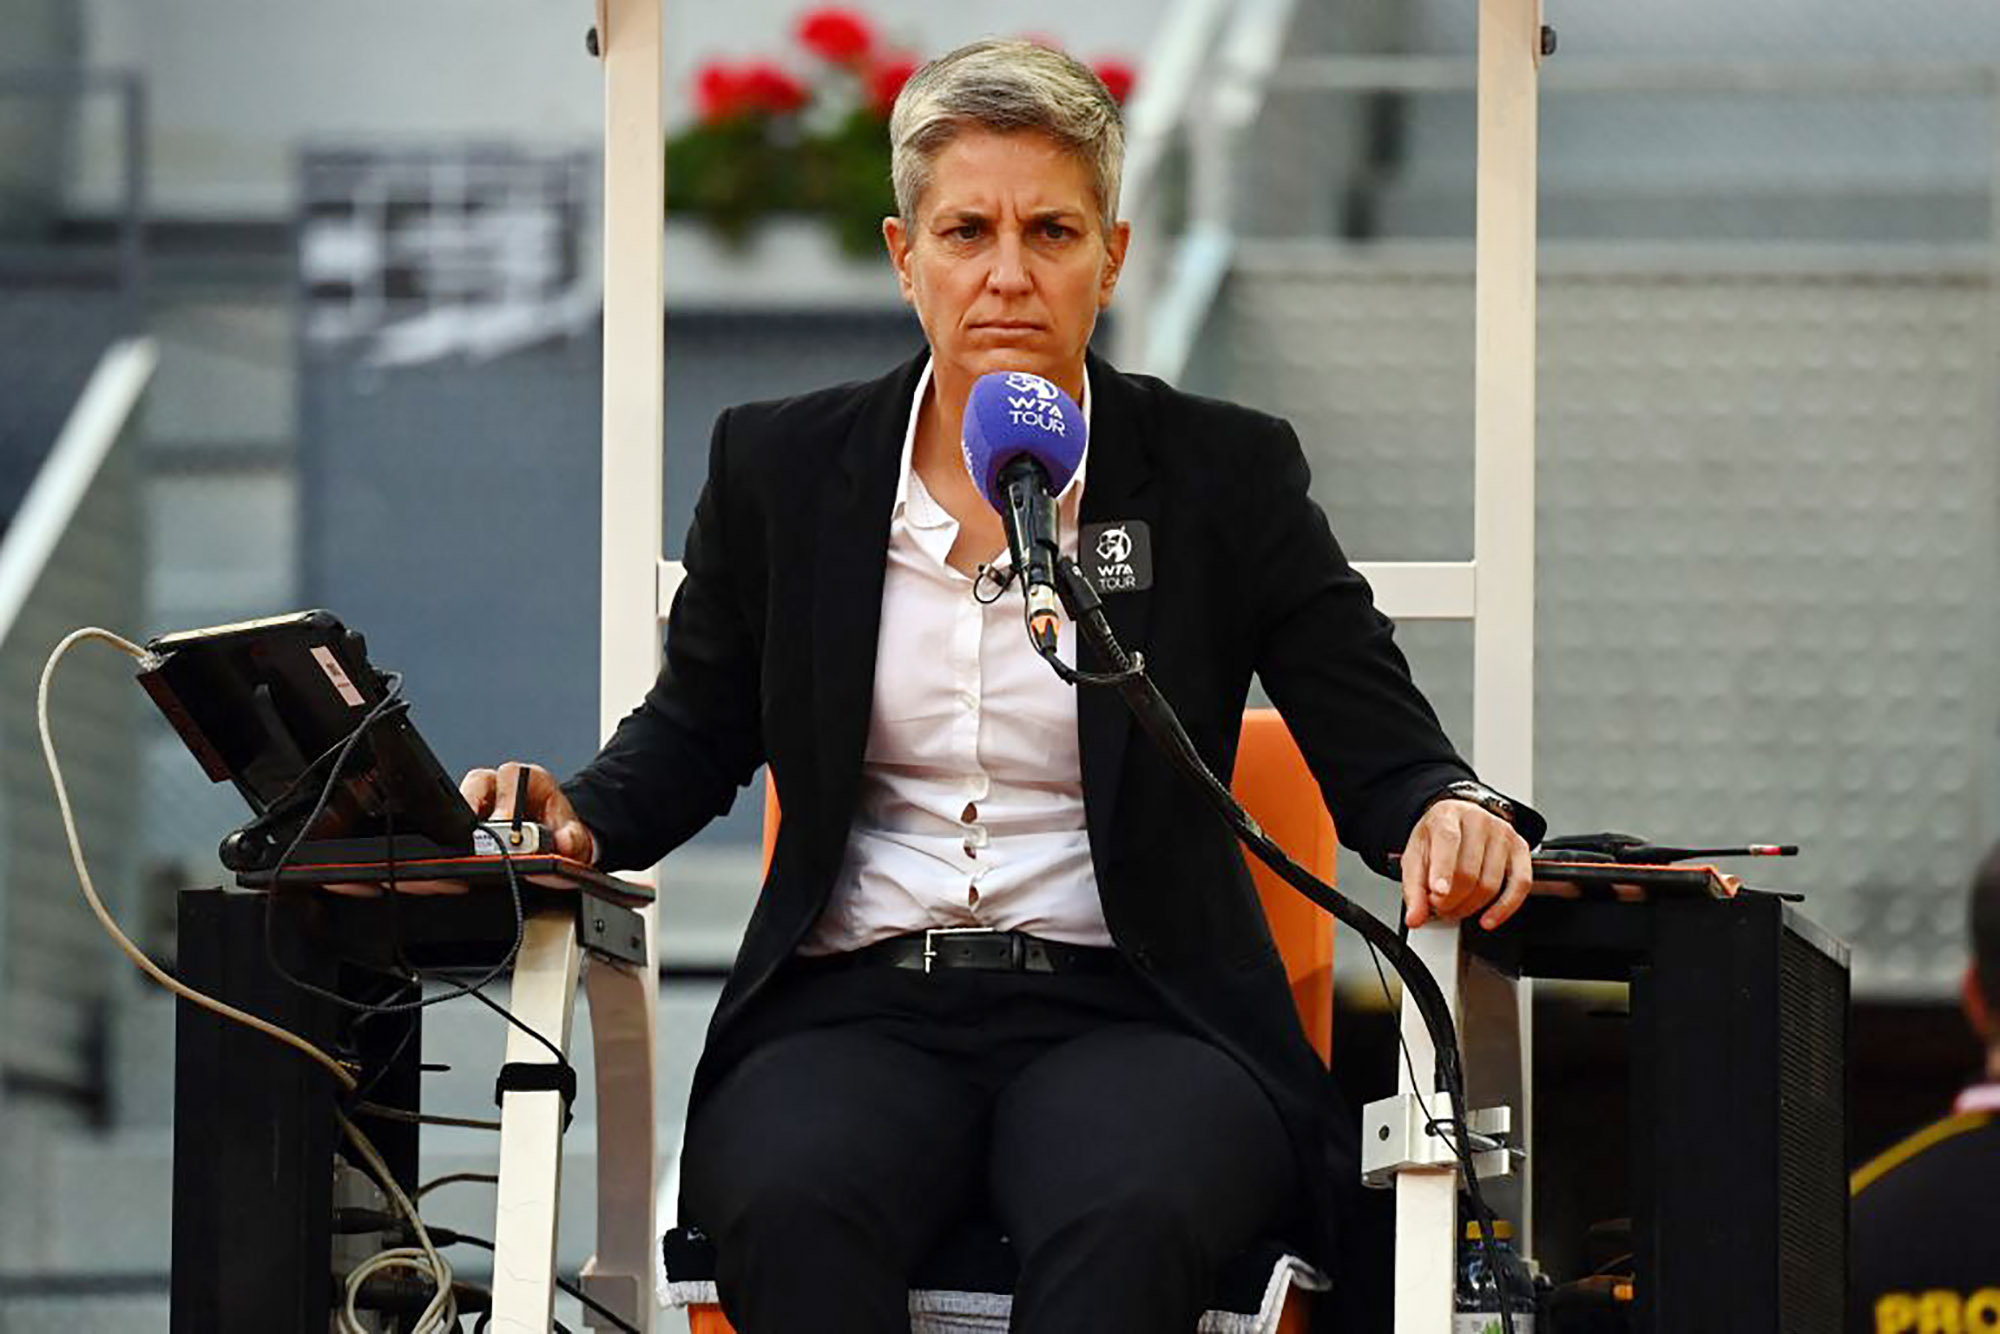 Cicak to Be 1st Female Chair Umpire in Wimbledon Men's Final - Bloomberg